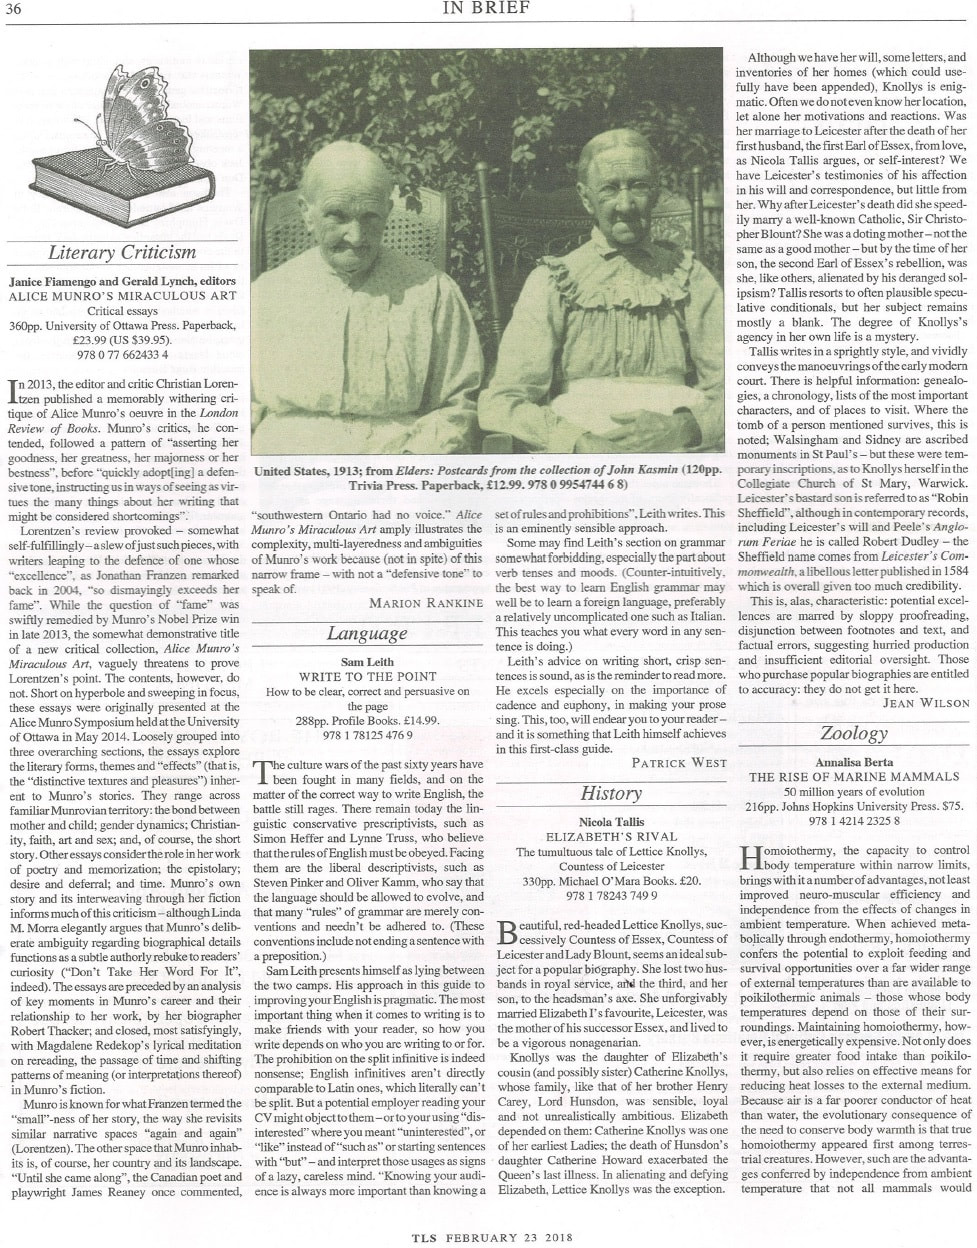 The Times Literary Supplement Review